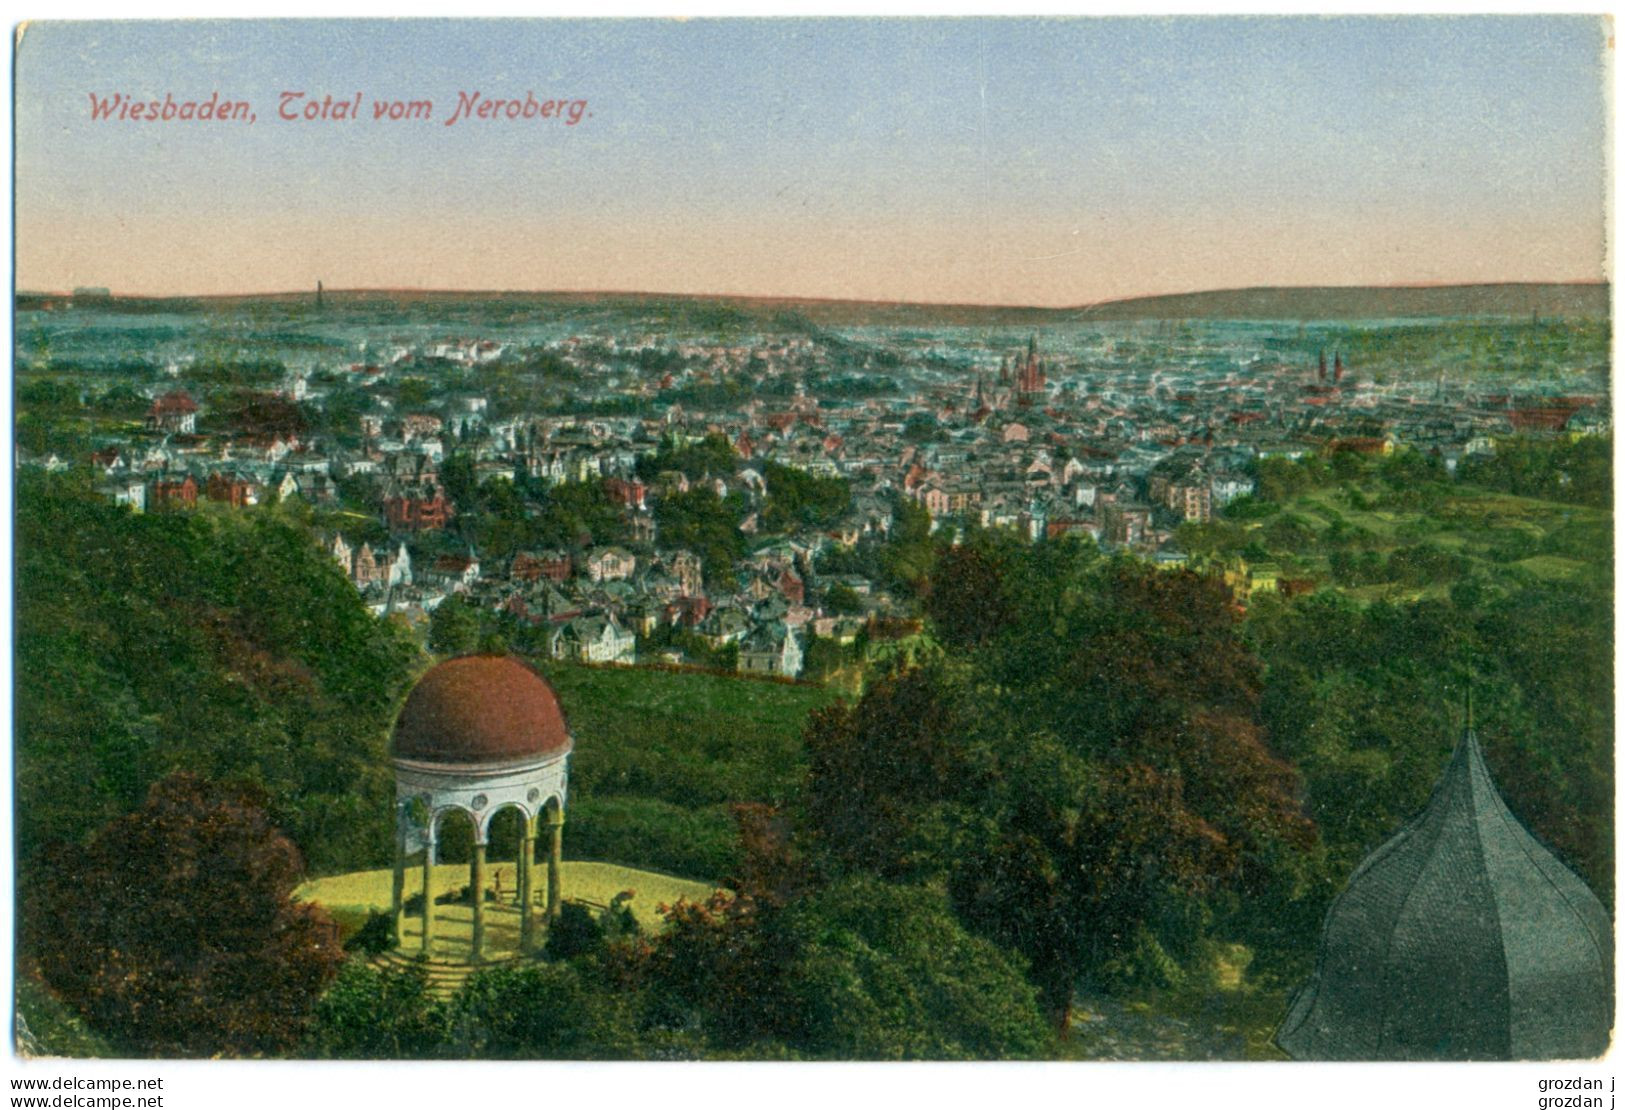 SPRING-CLEANING LOT (44 POSTCARDS), Wiesbaden, Germany